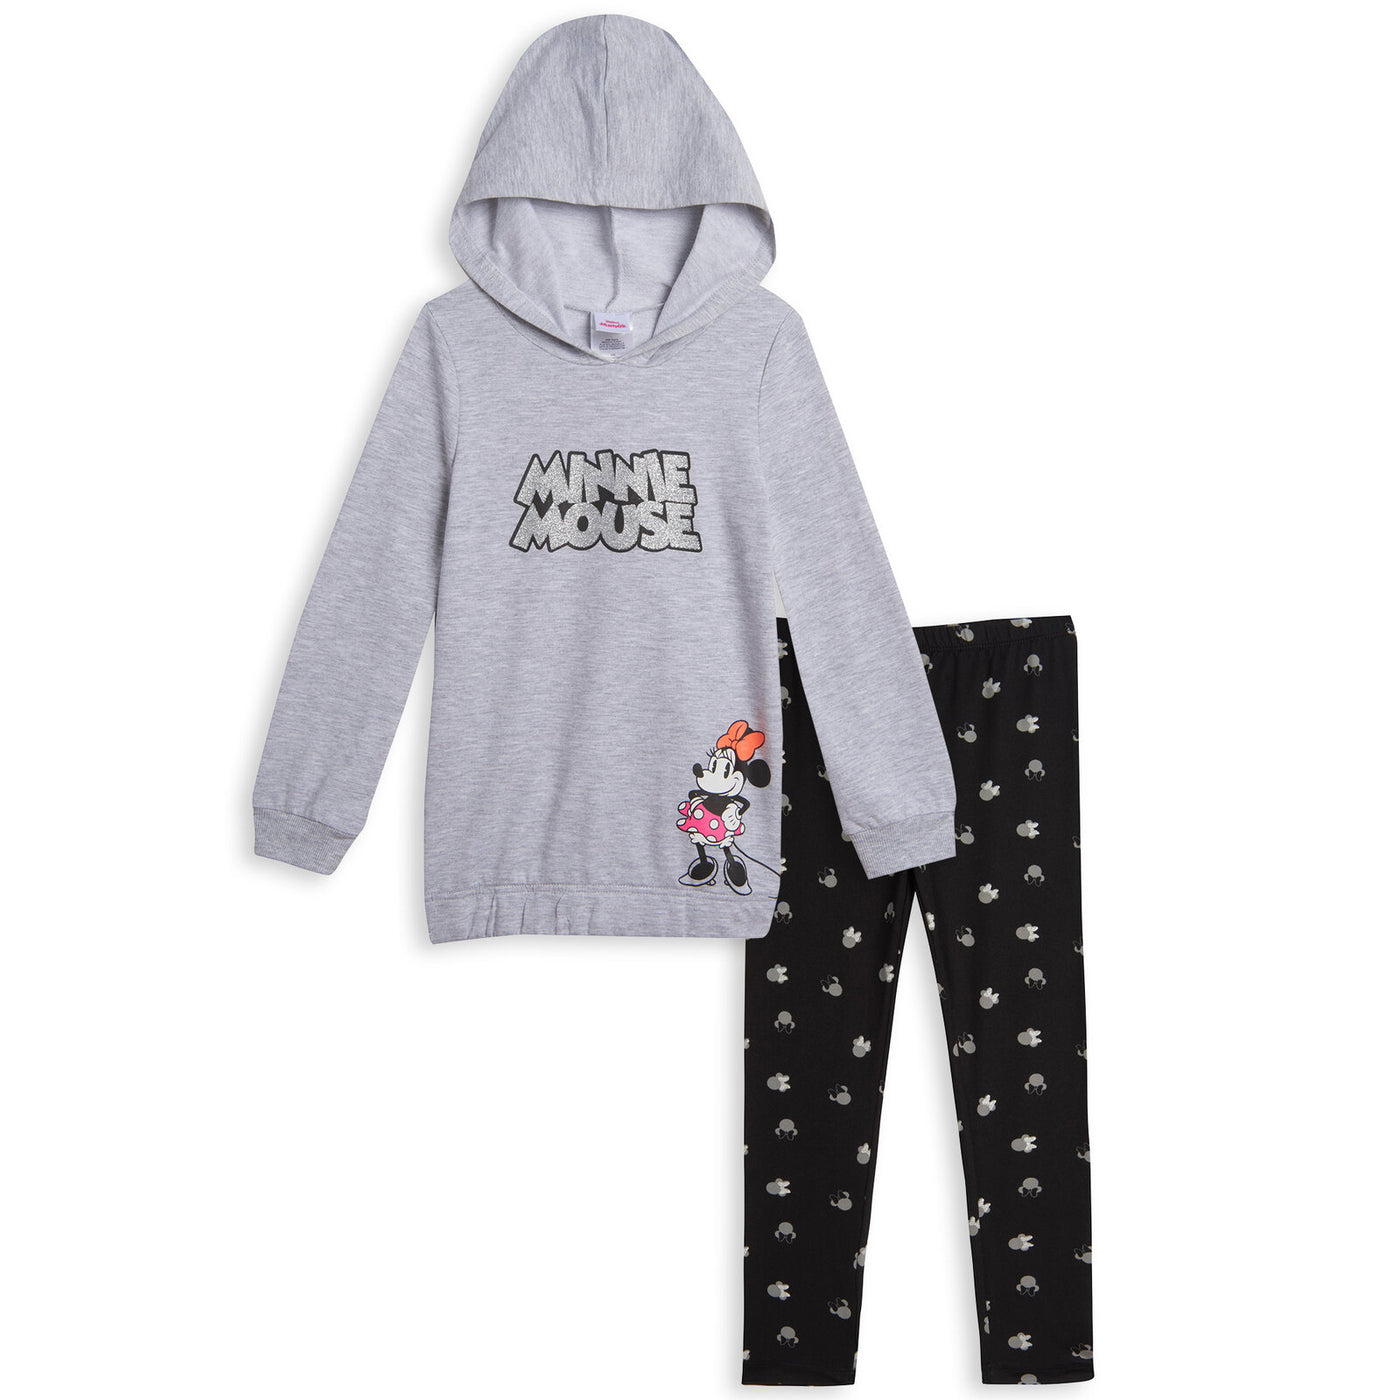 Minnie Mouse Hoodie and Leggings Outfit Set